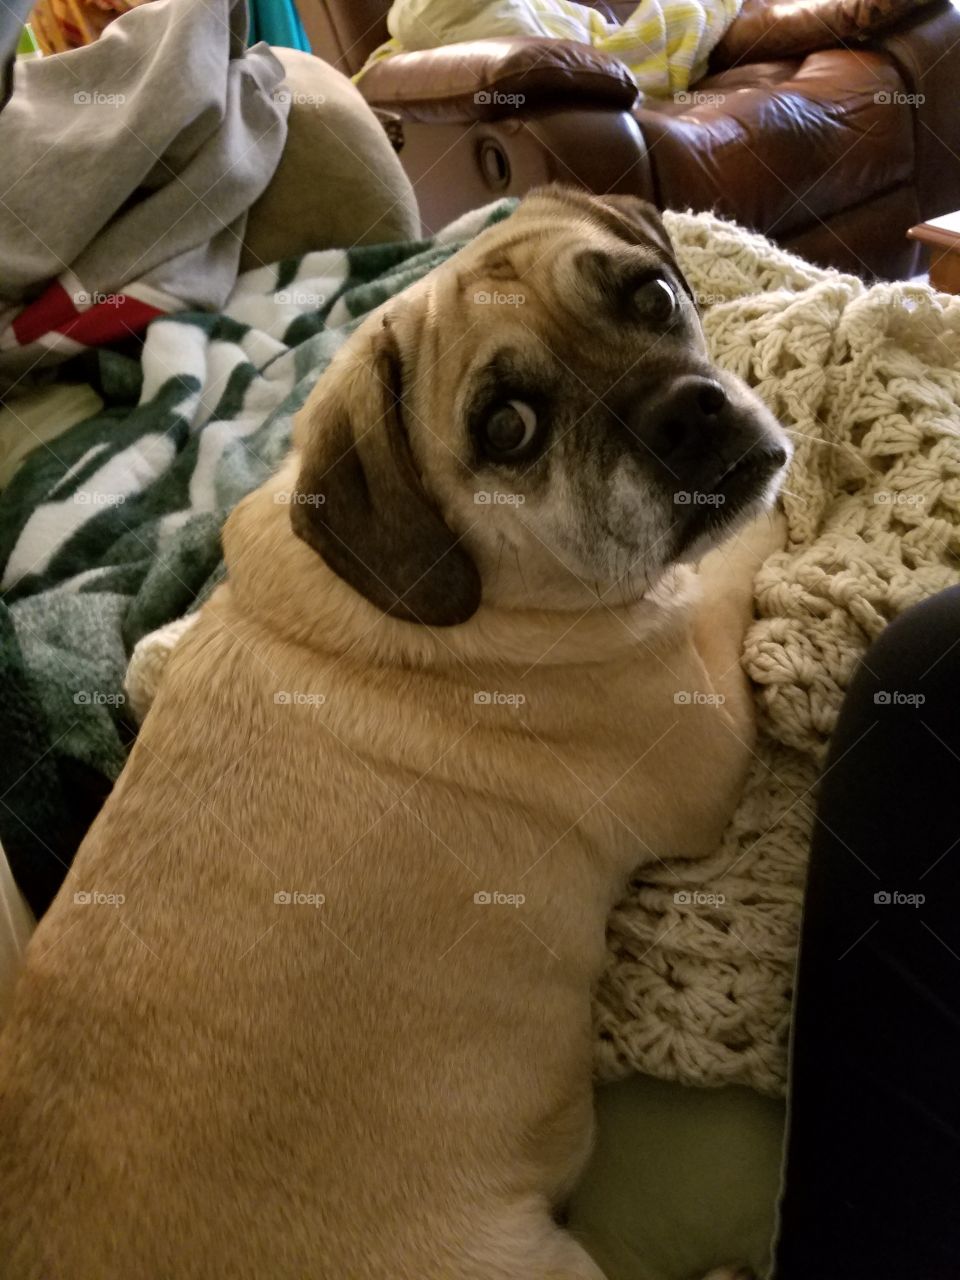 Puggle on a couch